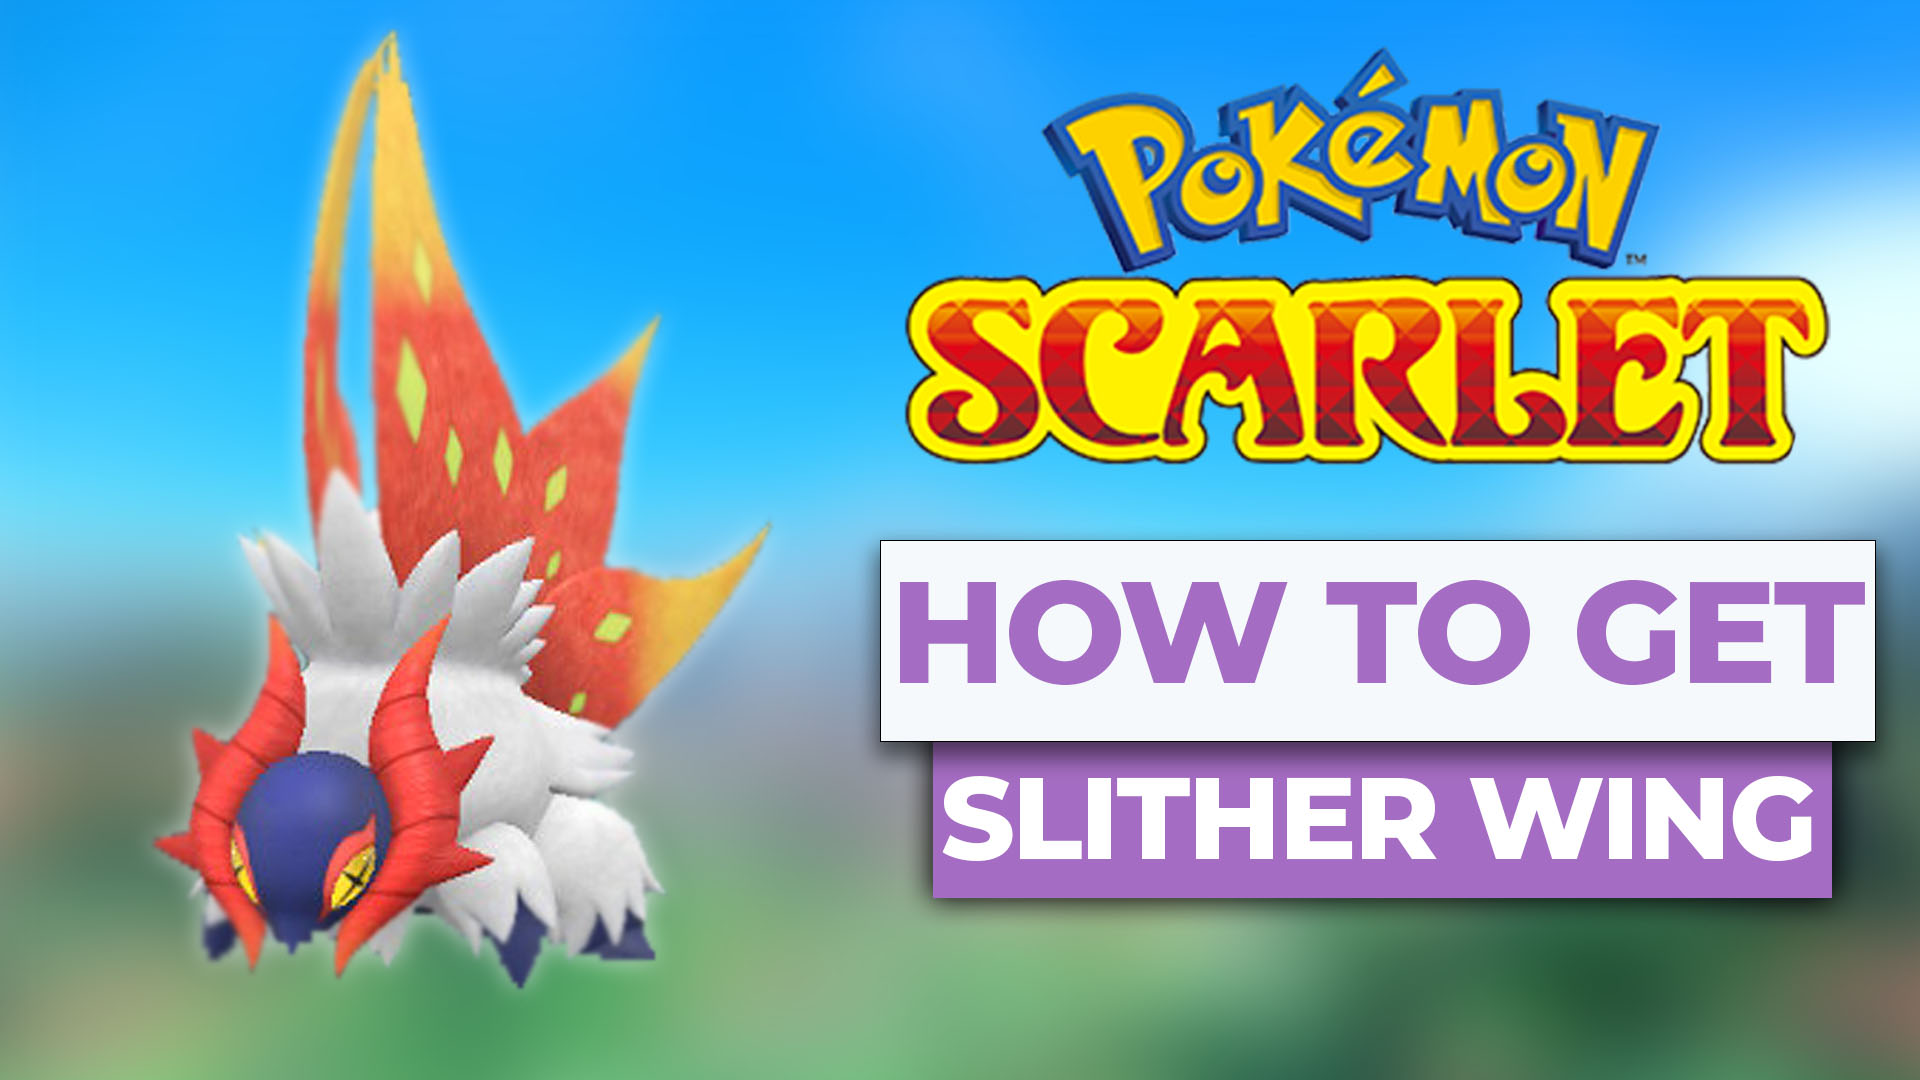 How To Get Slither Wing In Pokemon Scarlet (The Easy Way)